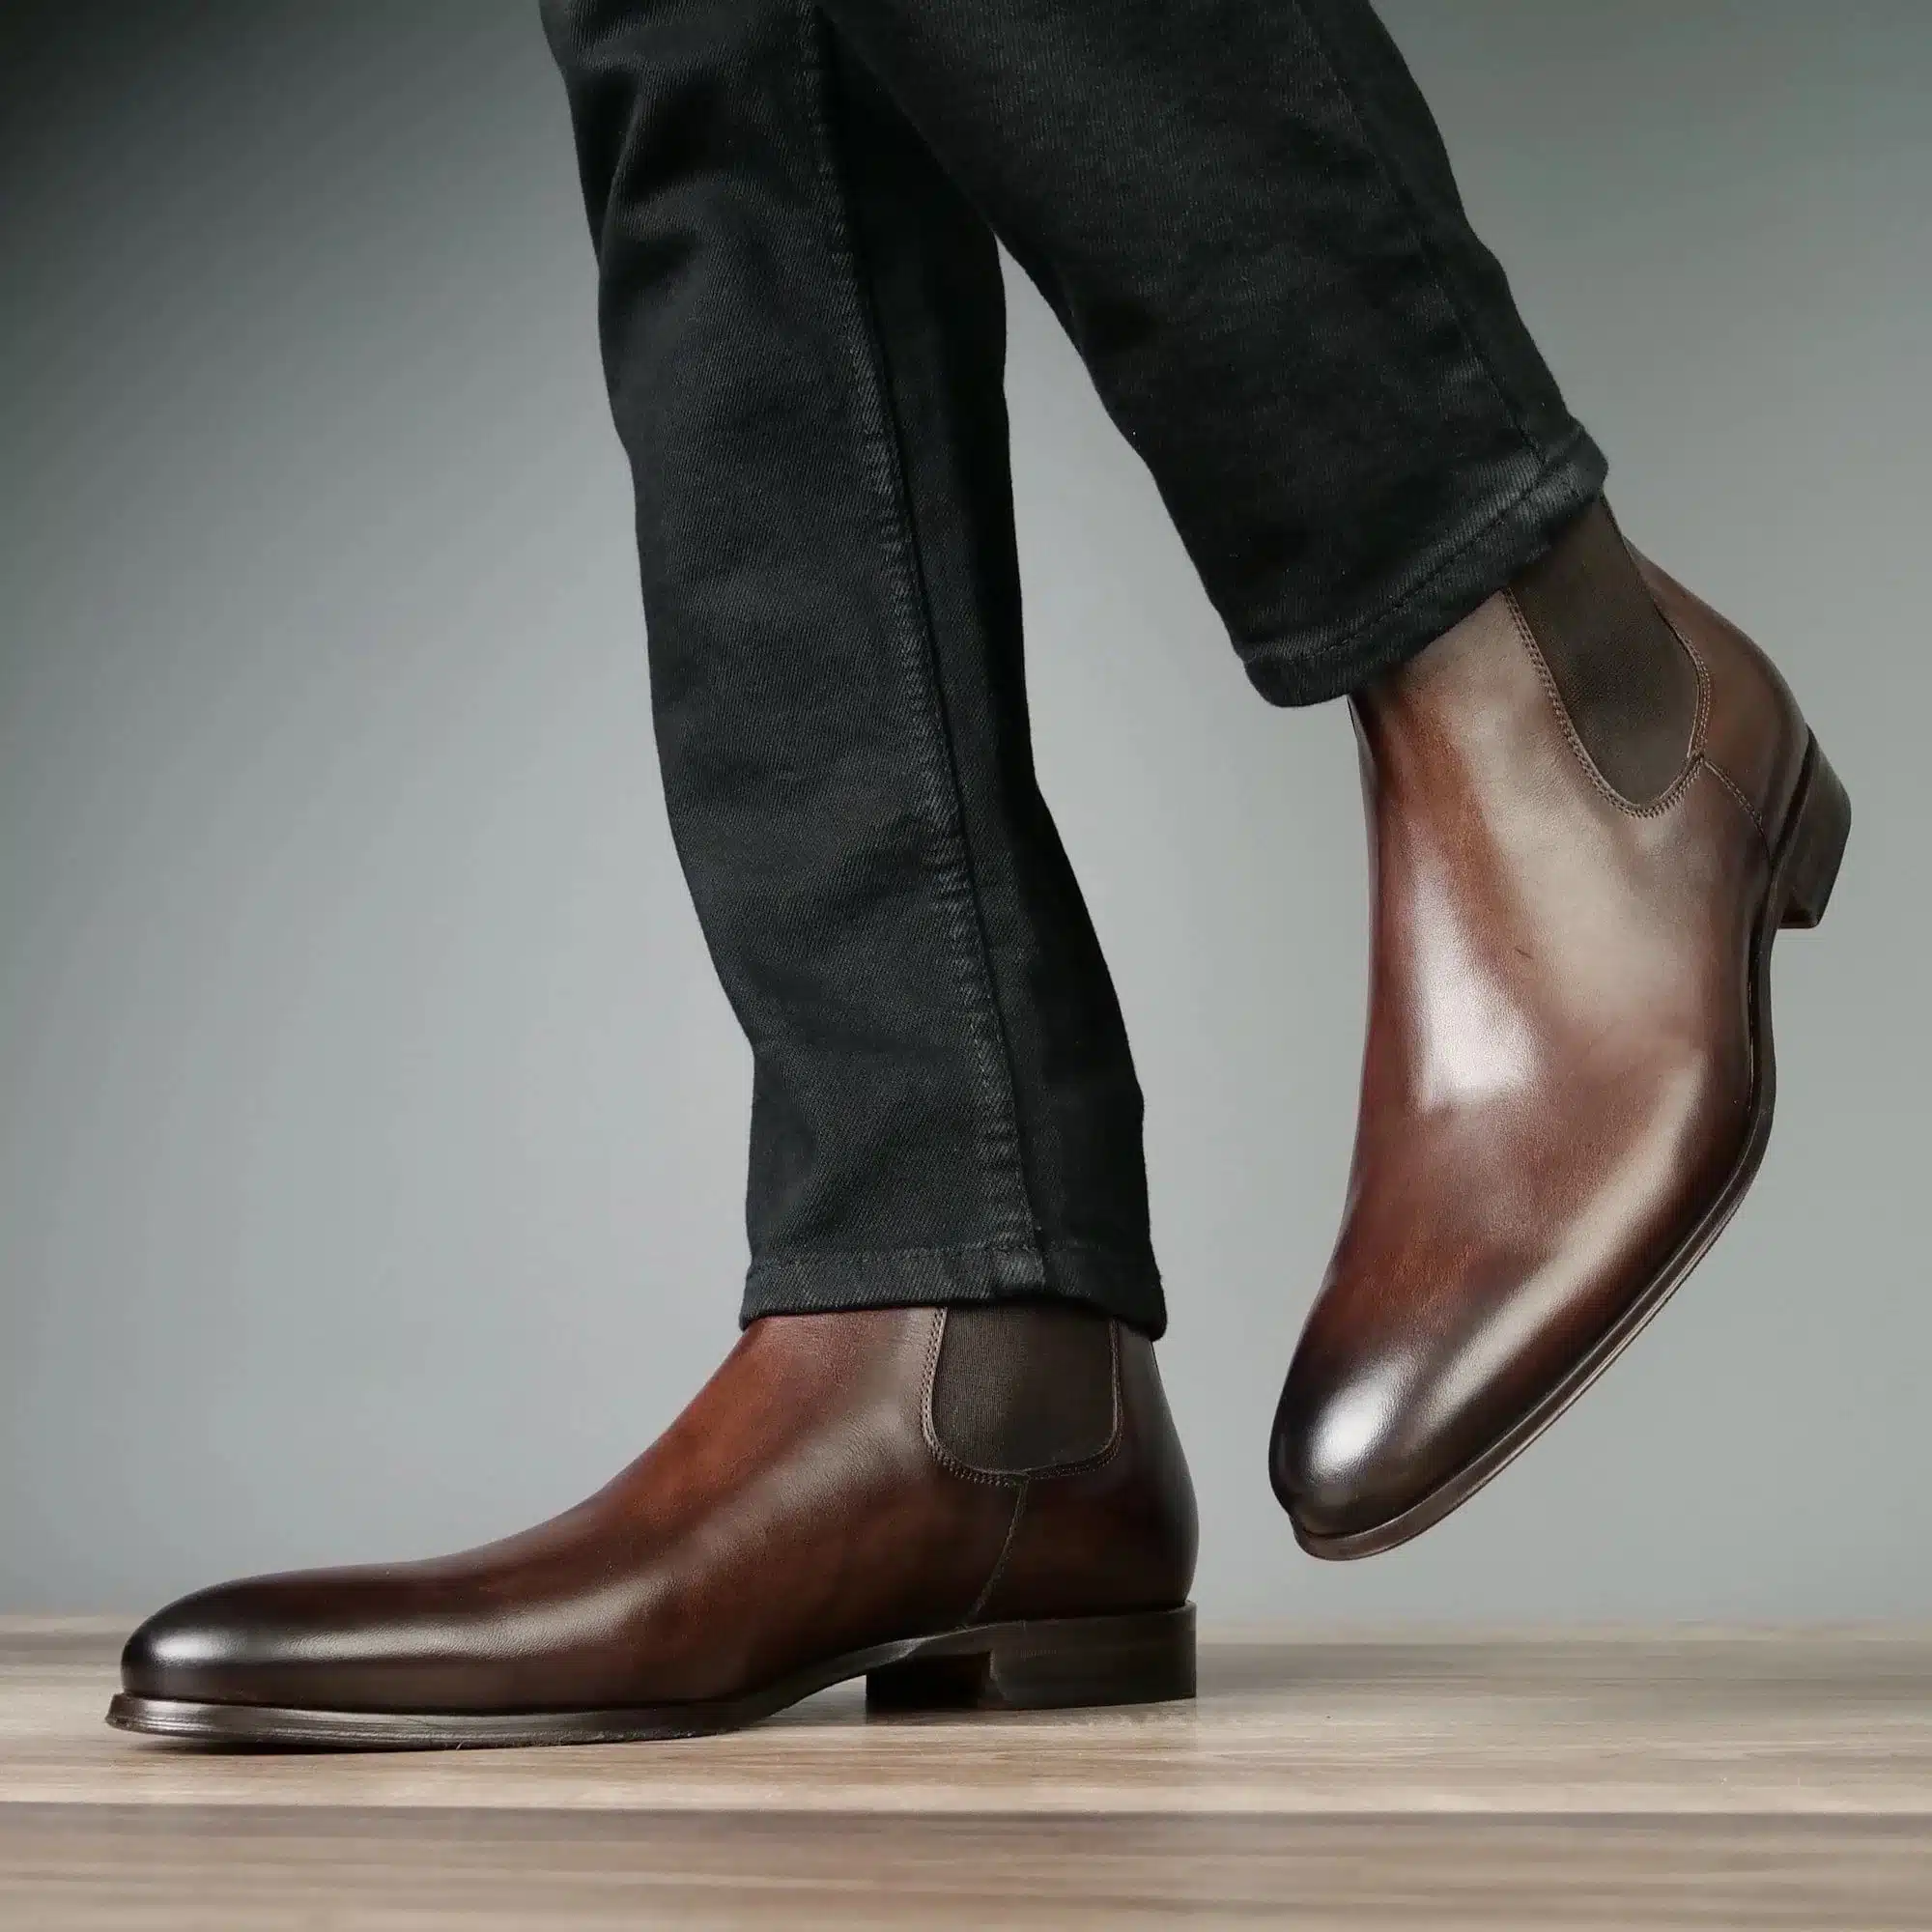 Loafer looks | Black pants brown shoes, Mens clothing styles, Brown dress  shoes